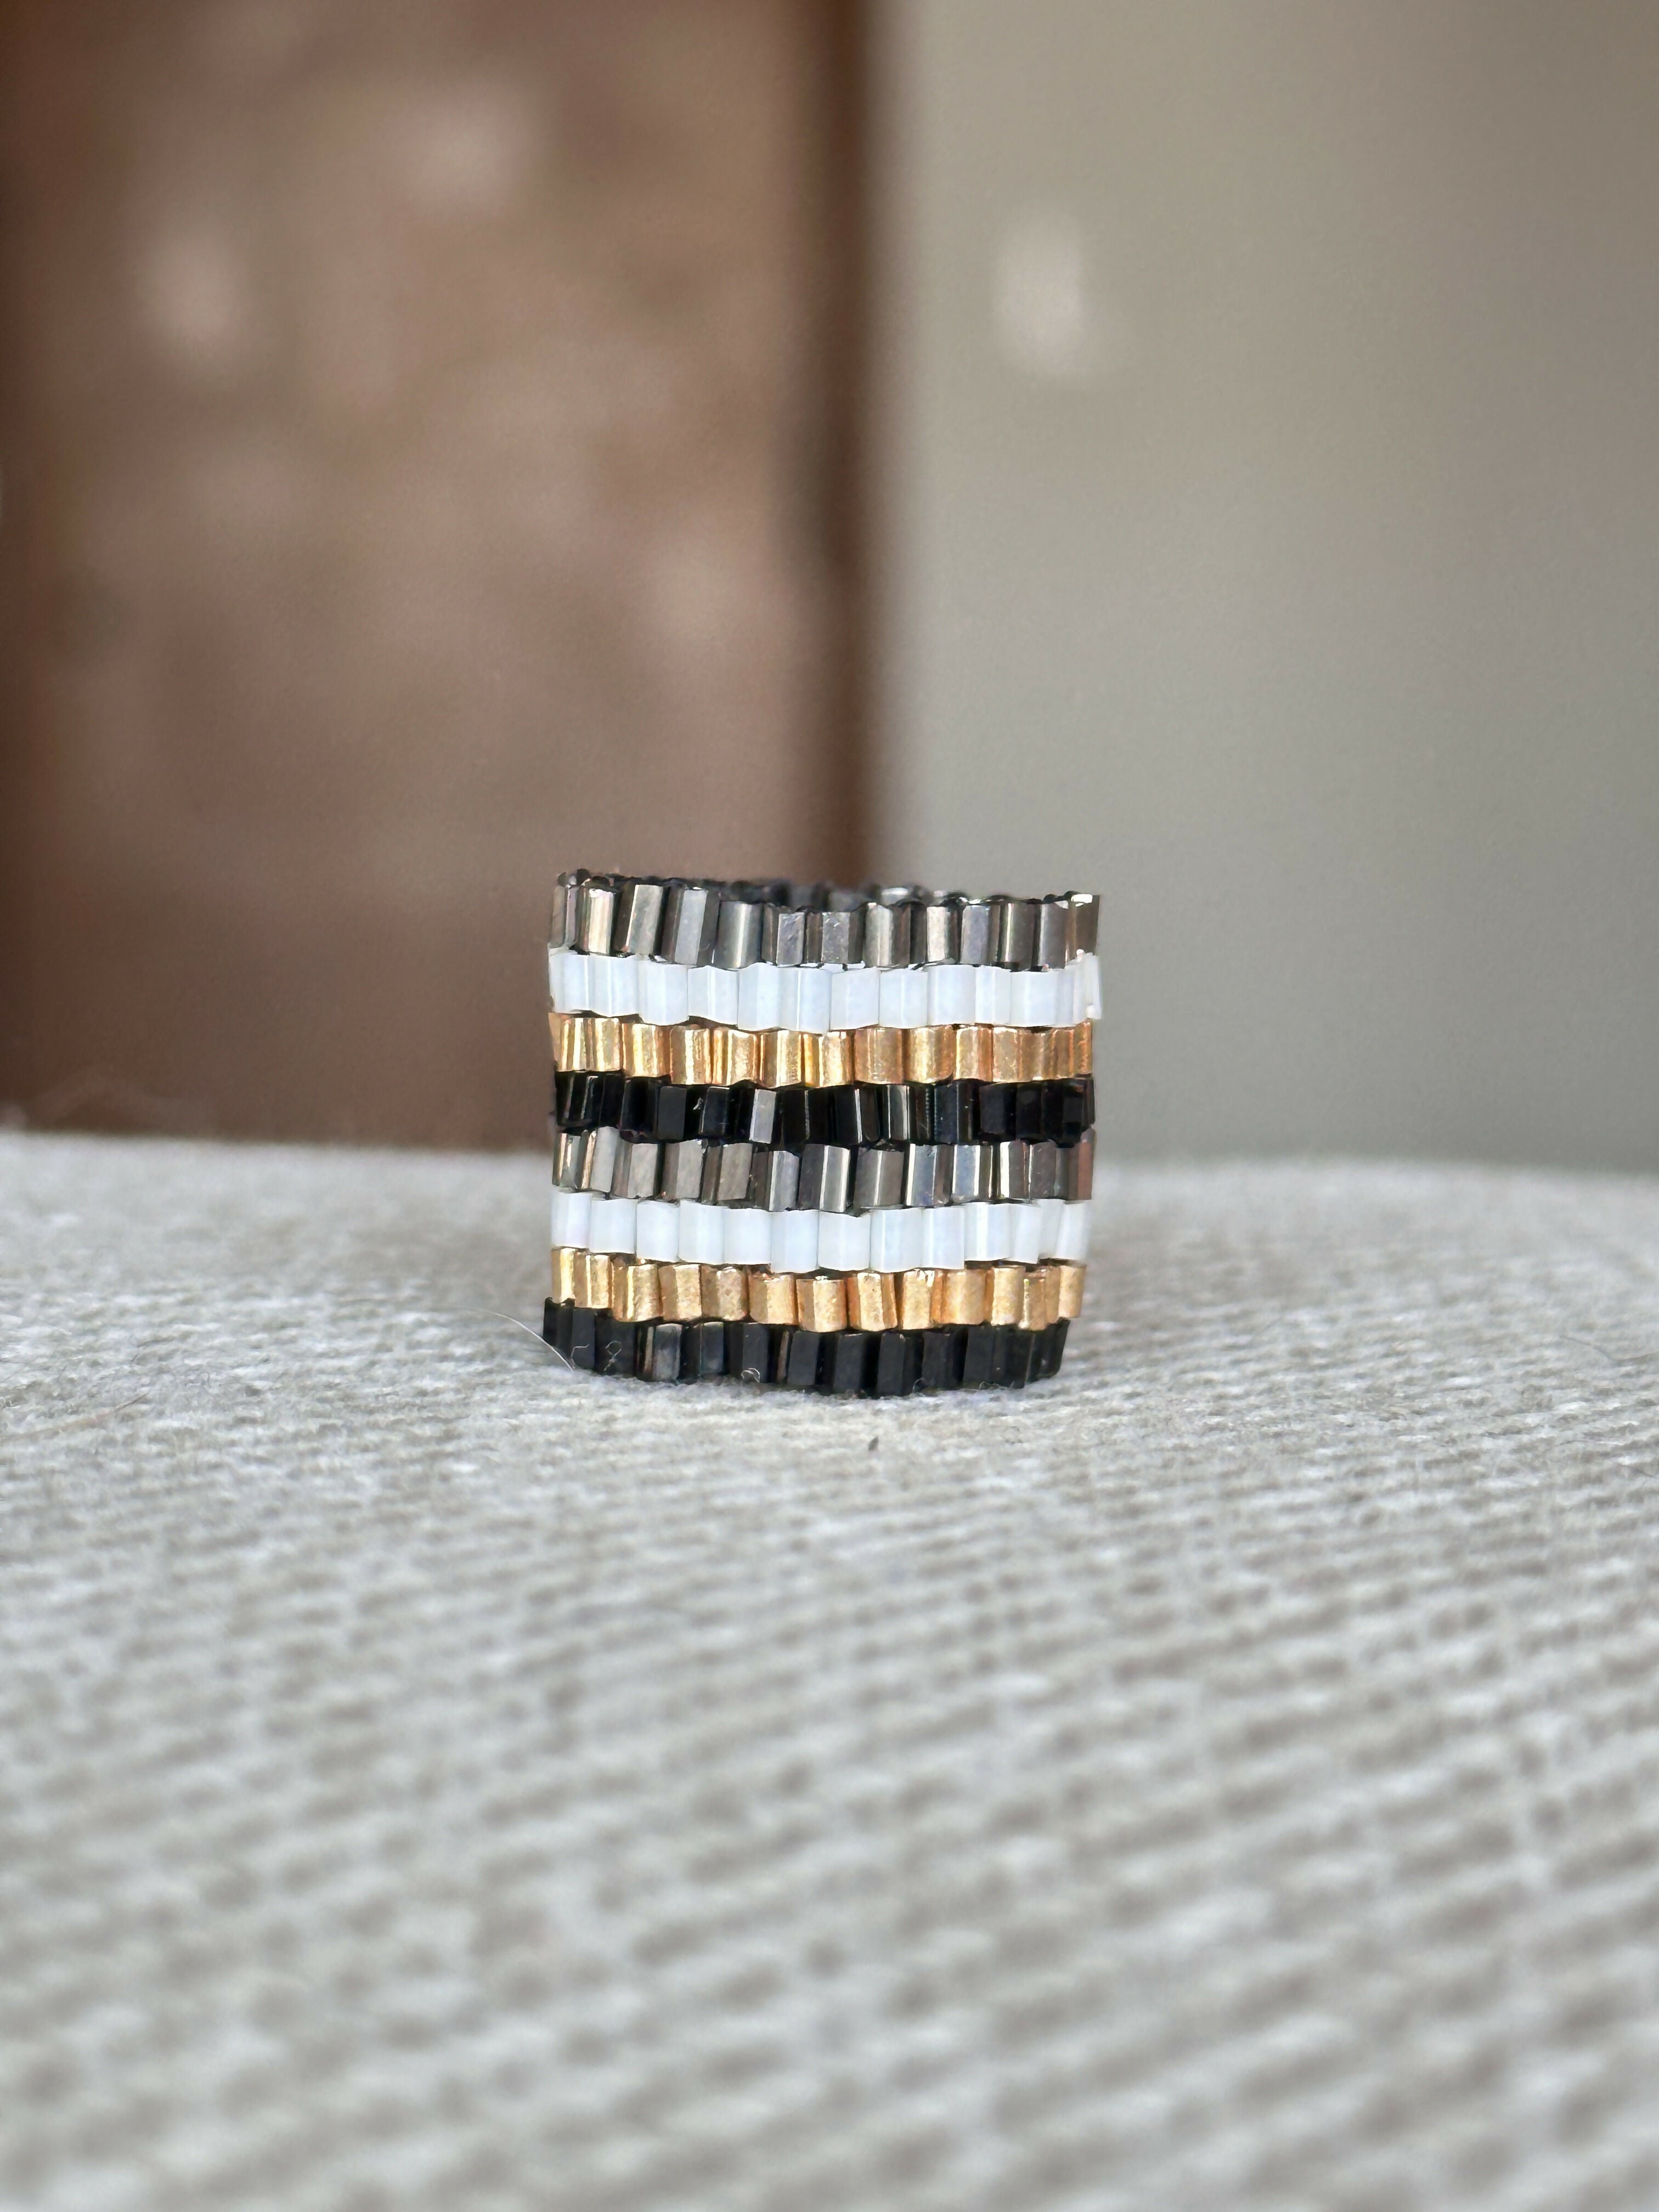 The PUT A RING ON IT collection: Lines serie 5, 8 rows!